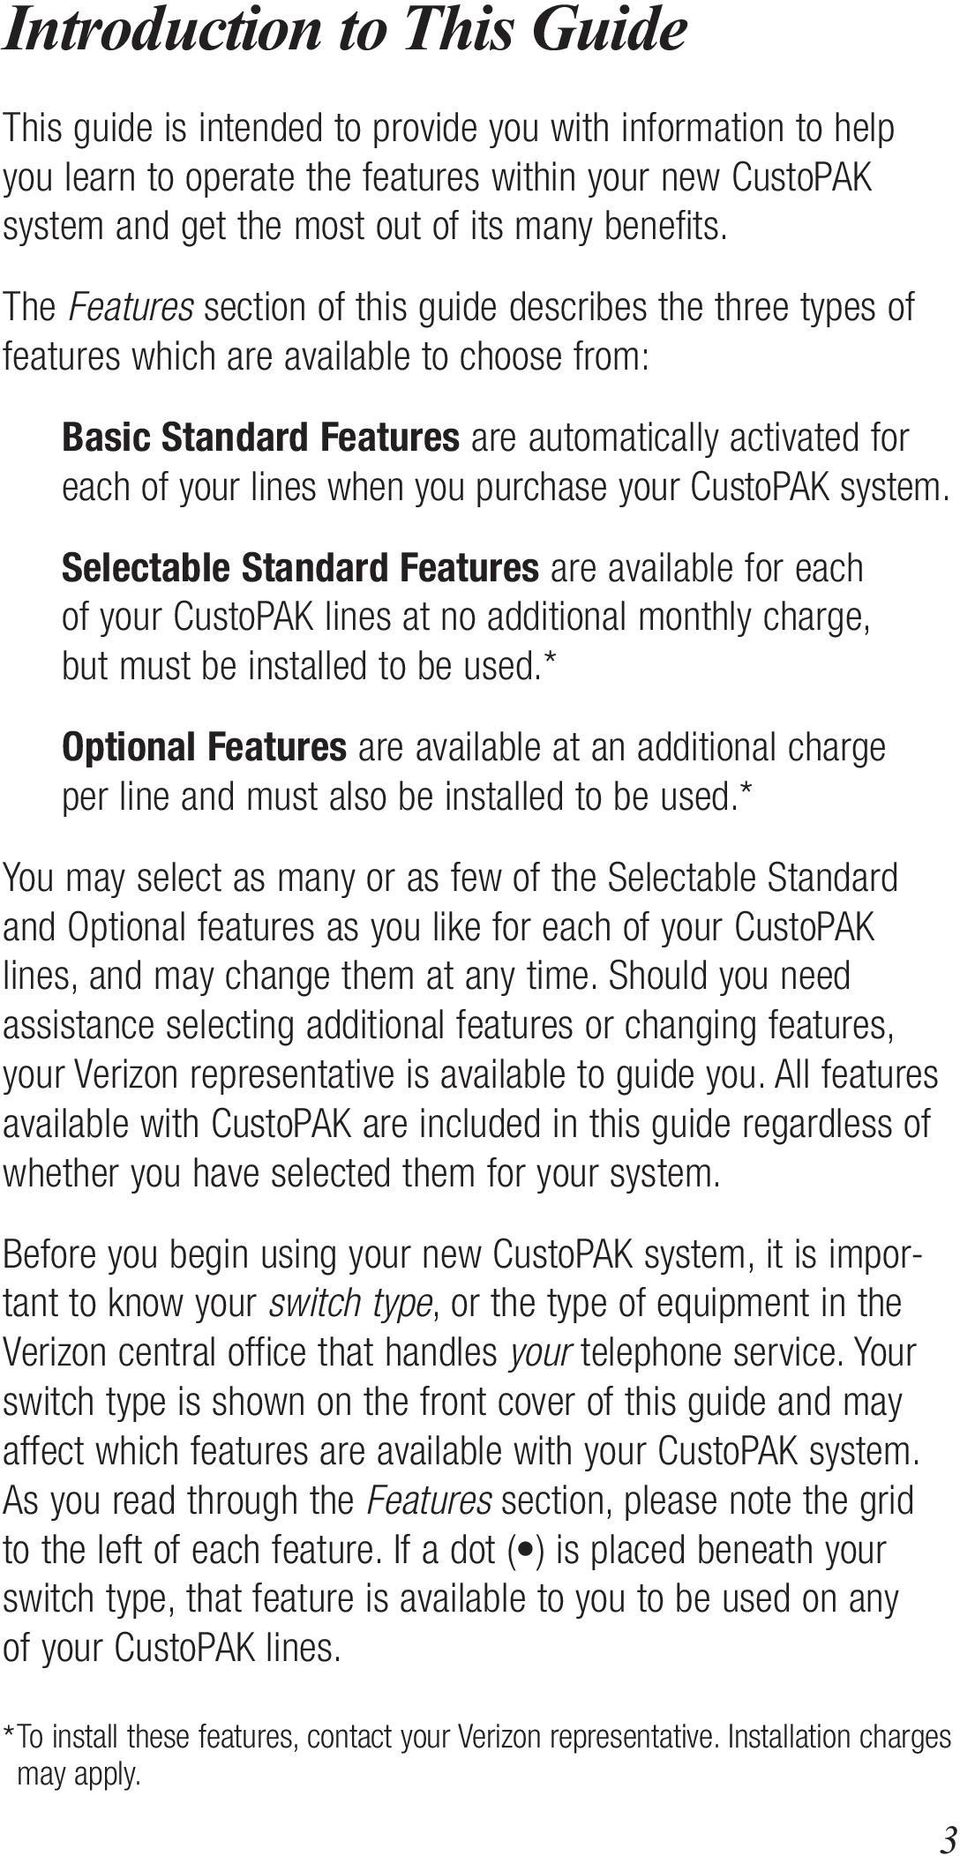 purchase your CustoPAK system. Selectable Standard Features are available for each of your CustoPAK lines at no additional monthly charge, but must be installed to be used.